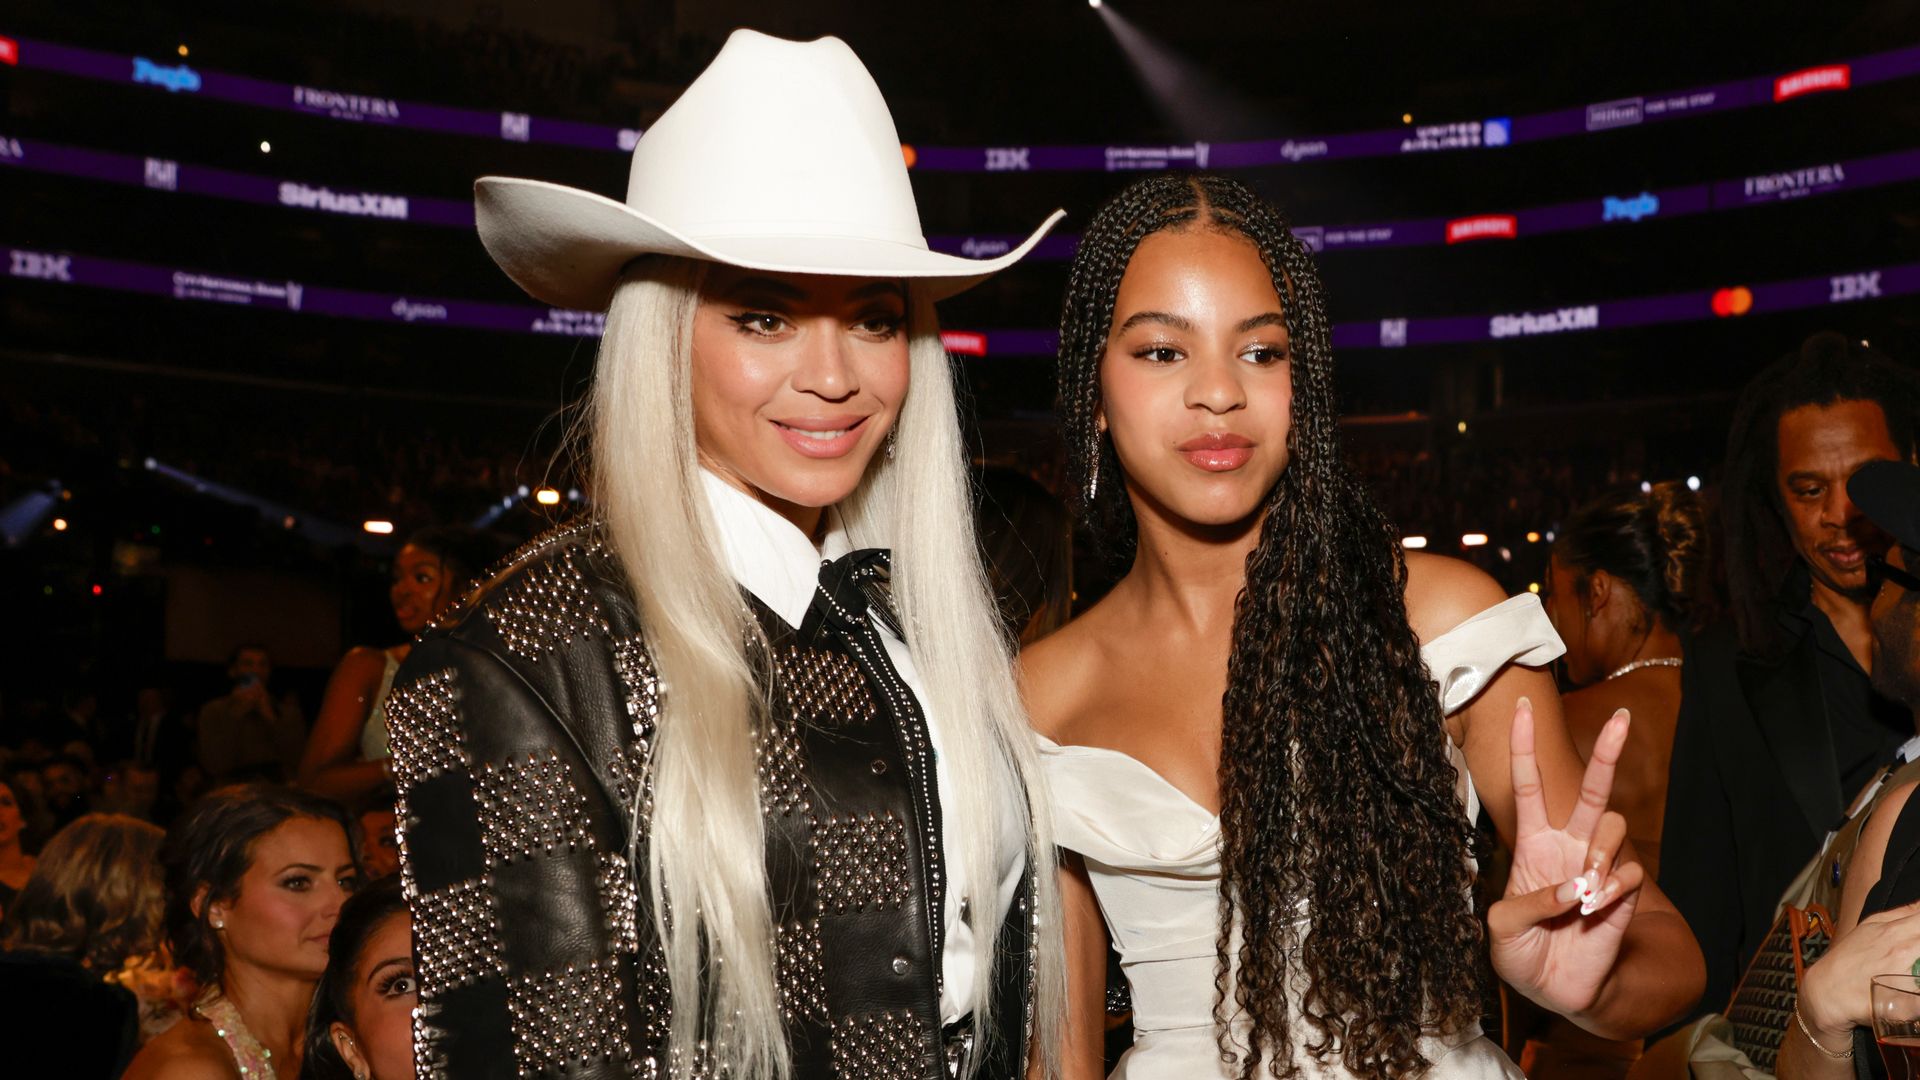 Beyoncé and Blue Ivy's mother-daughter bond 'impacted' co-stars in newly-unveiled first movie together